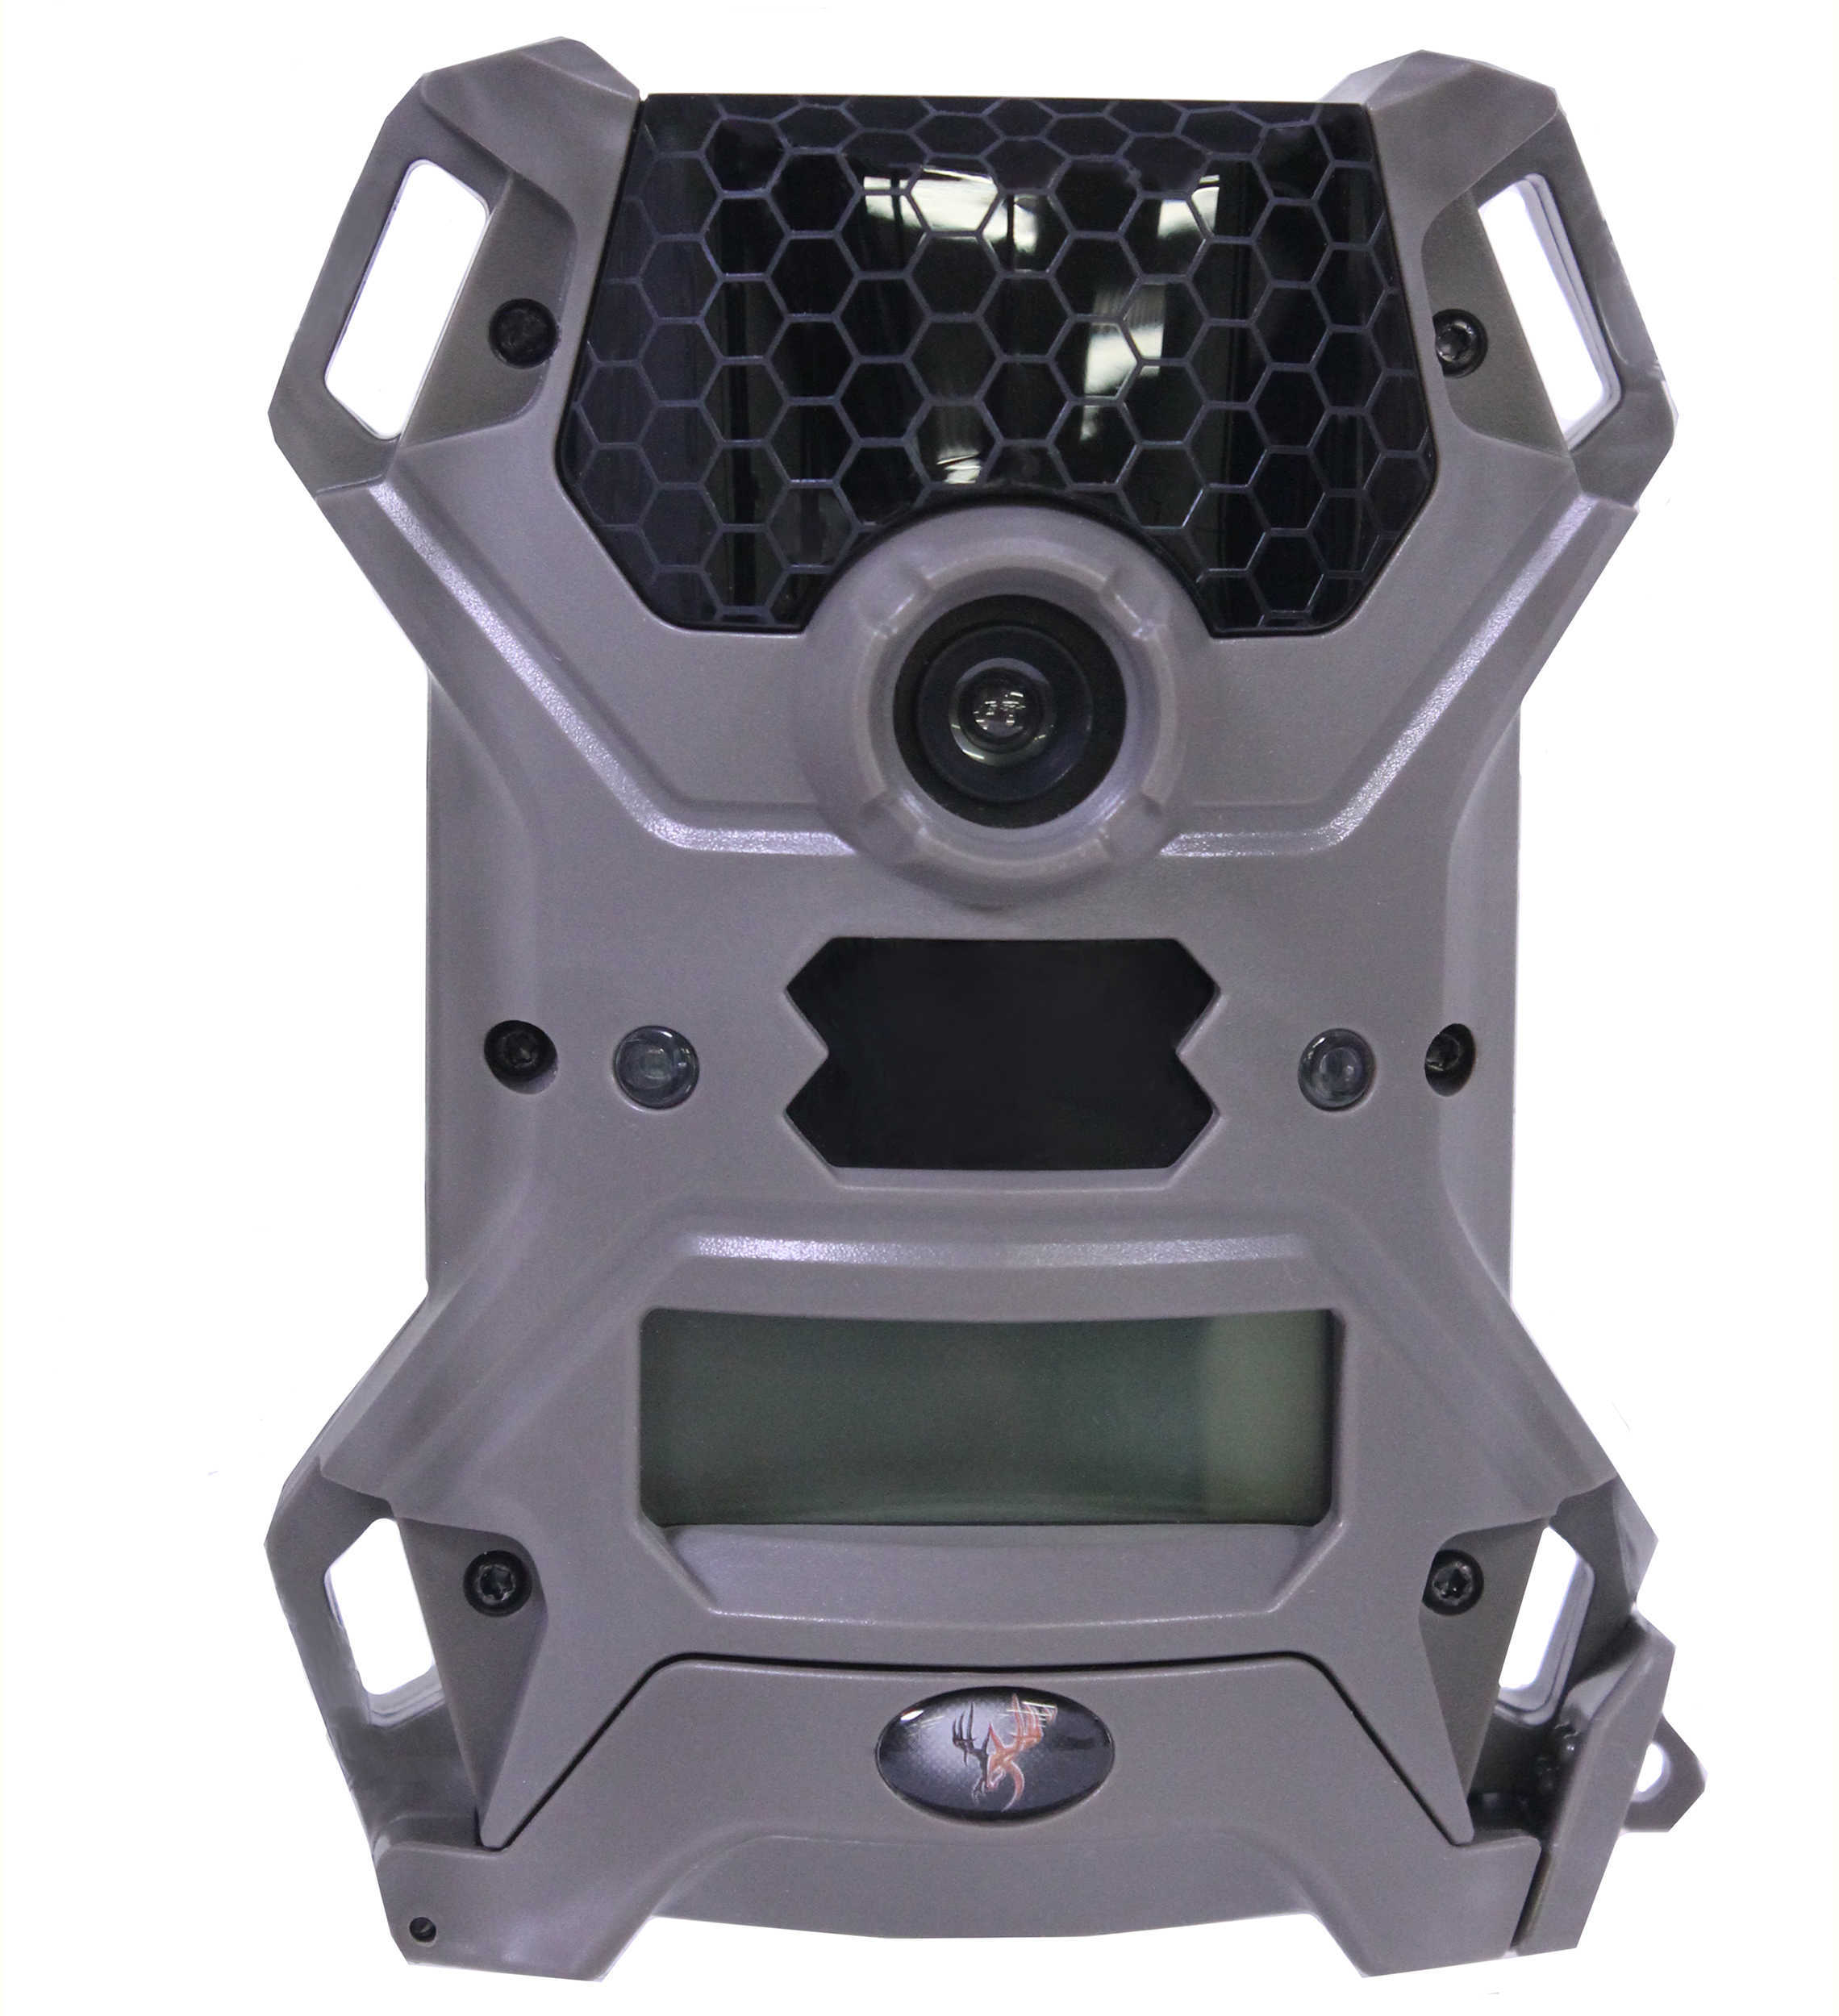 Wildgame Innovations / BA Products Vision 8 LightScout Camera 8 Megapixel, Brown Md: V8B7